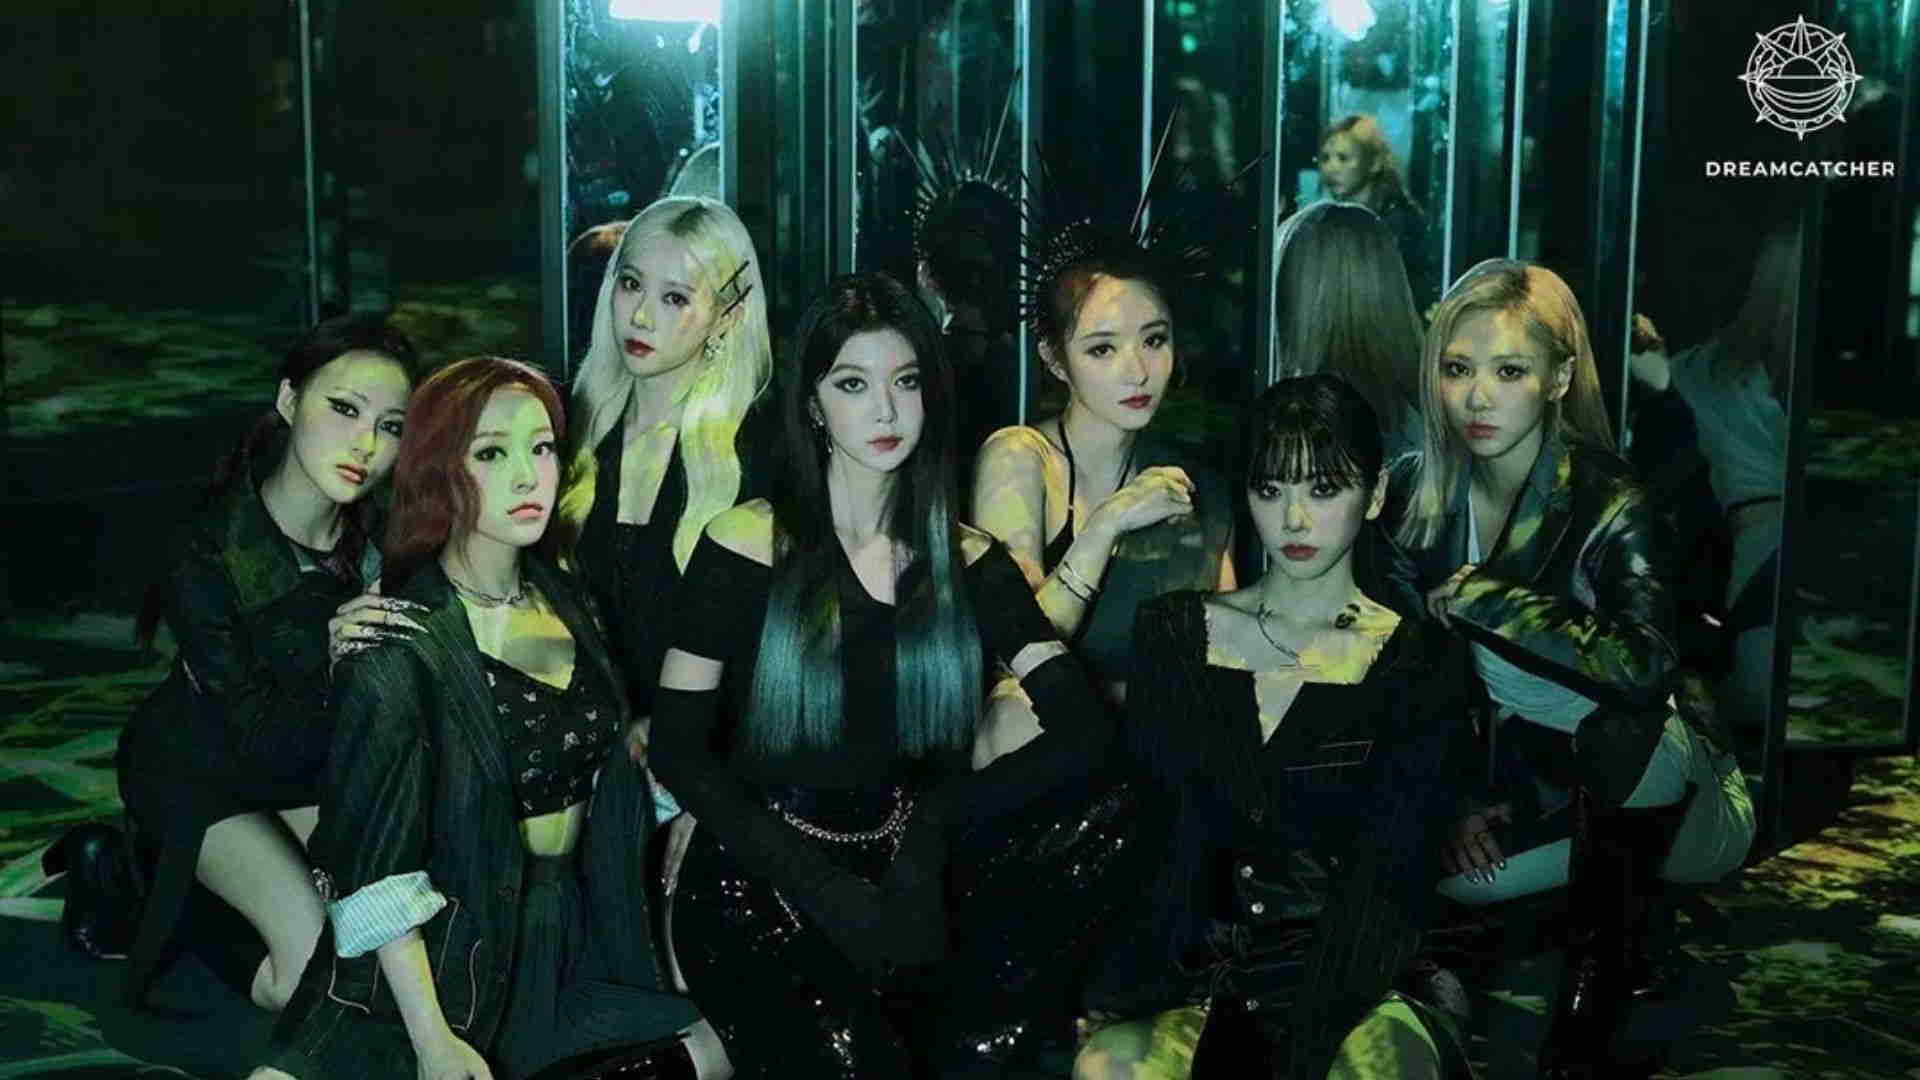 Dreamcatcher - Biography, Profile, Facts, and Career